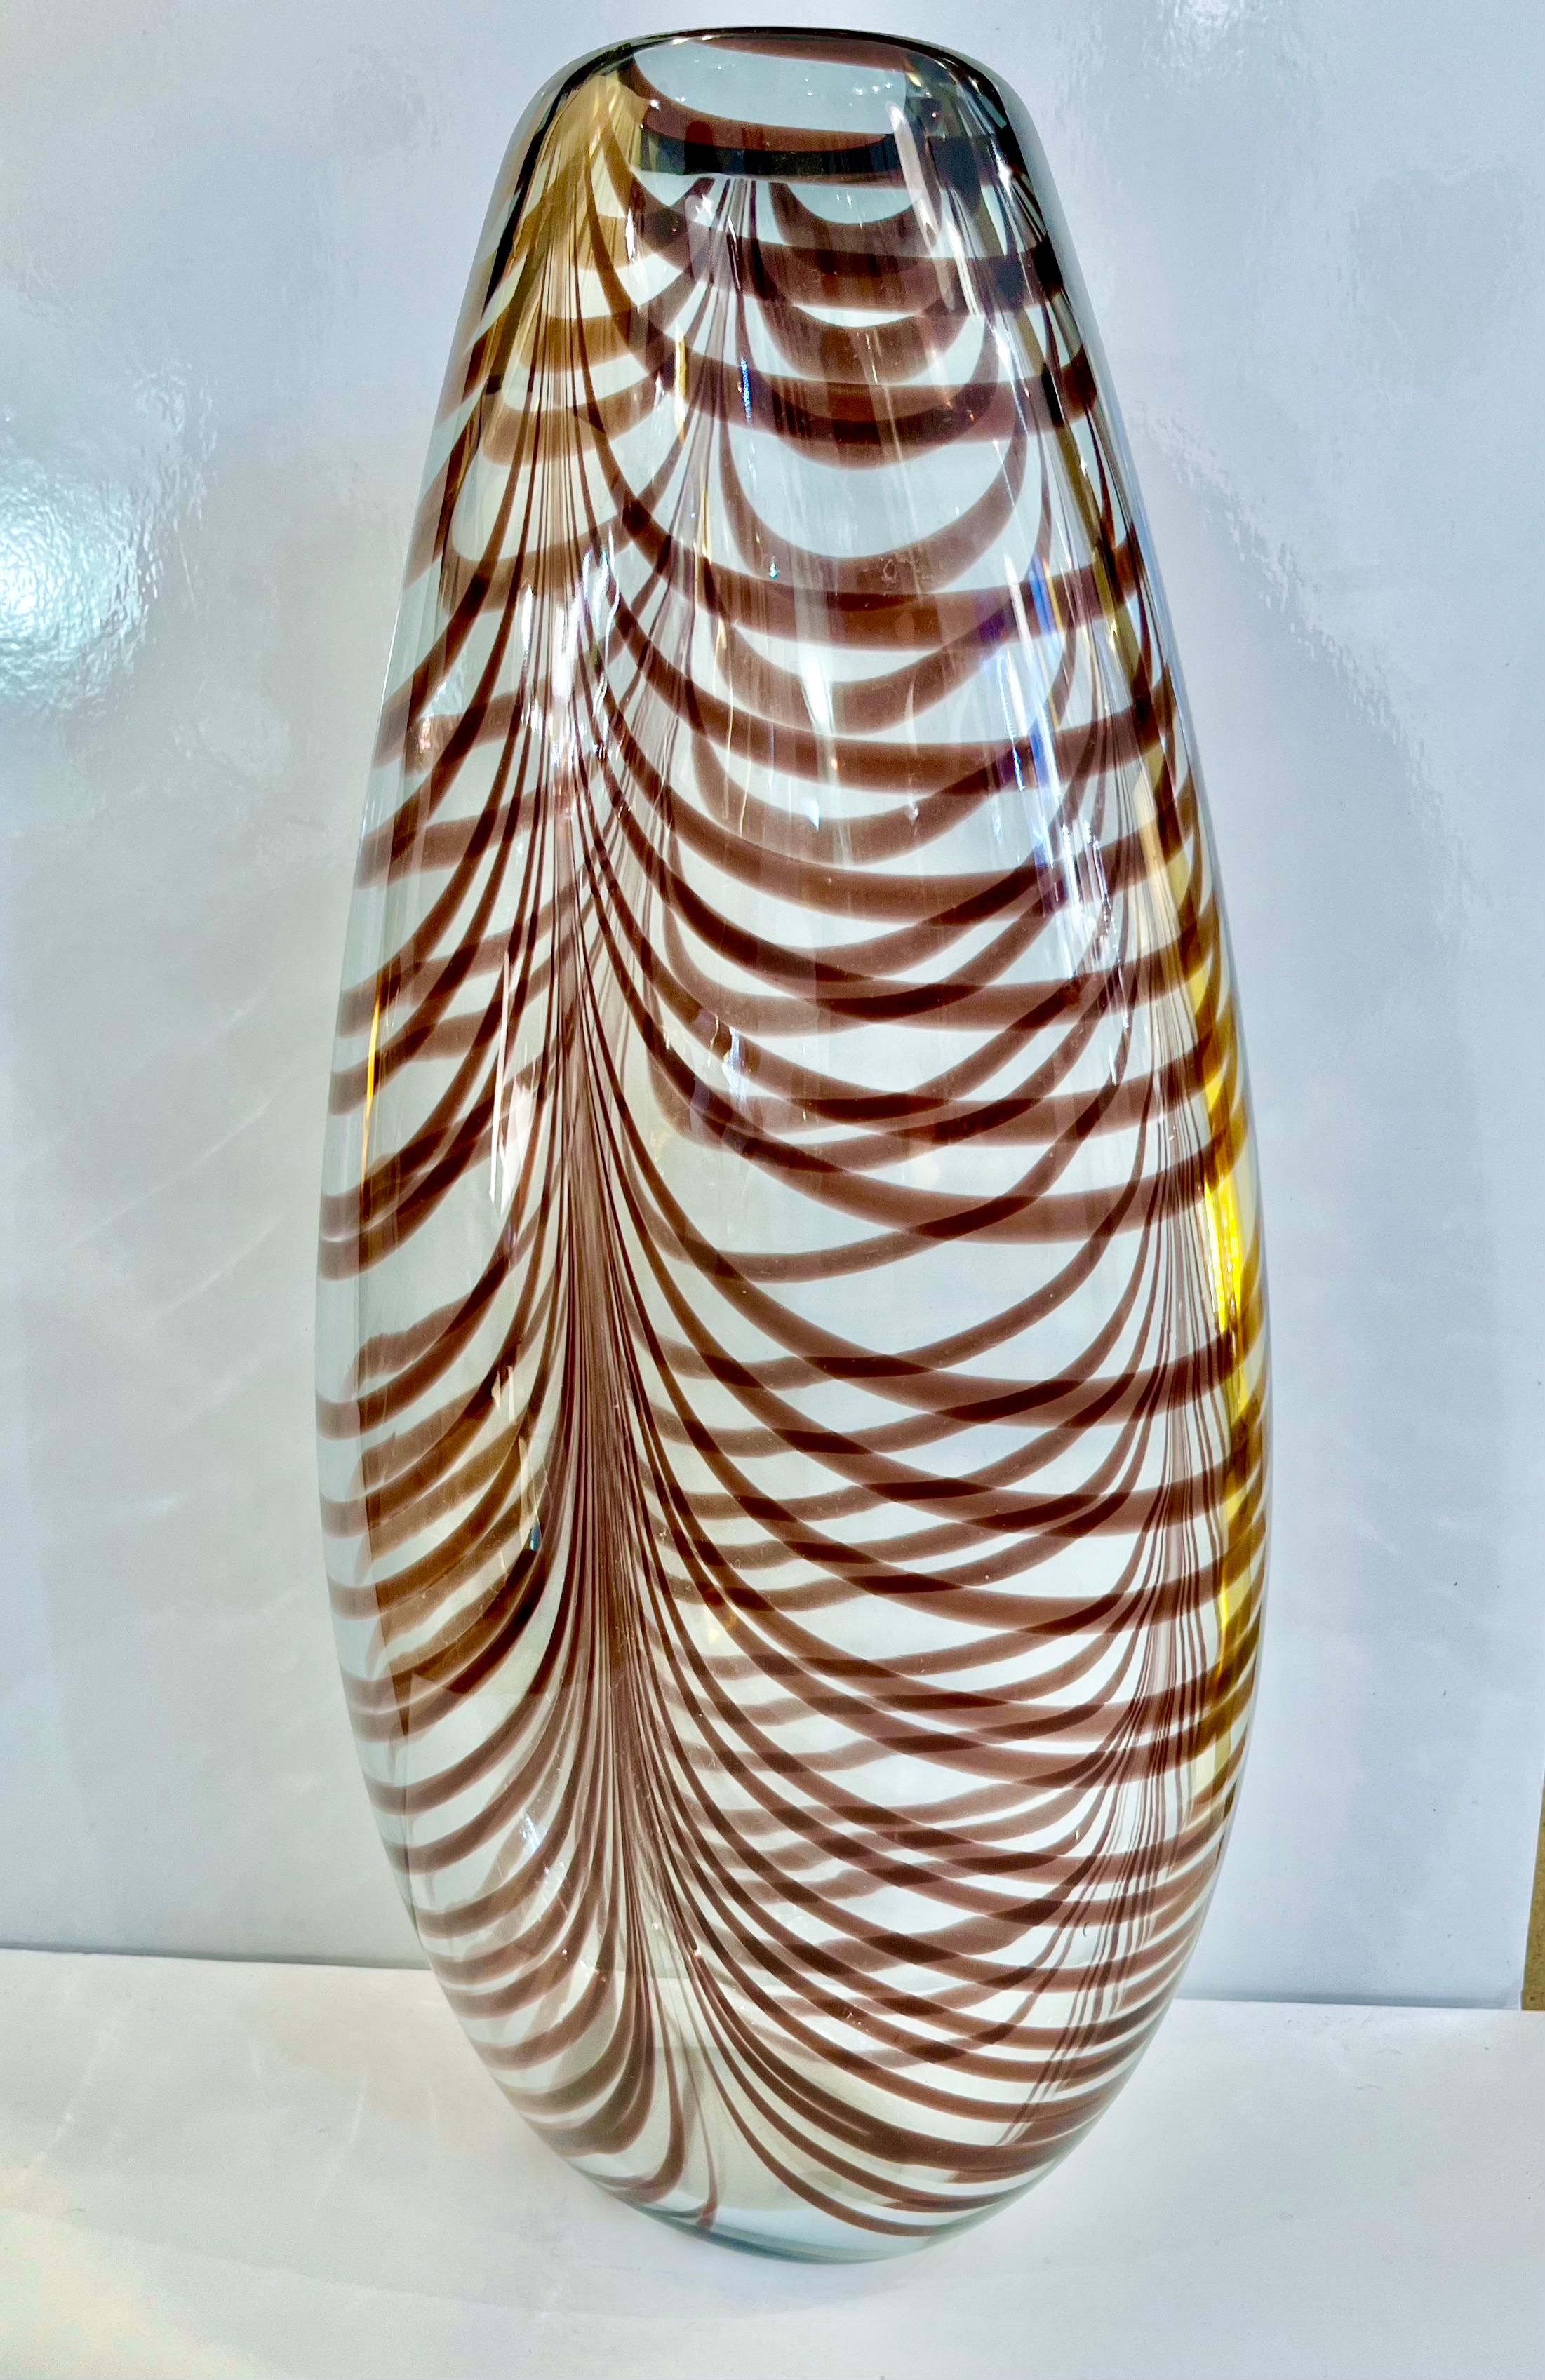 Precious vintage art sculpture vase by Formia in overlaid blown crystal clear Murano glass with organic Fenicio decoration in an unusual deep amethyst color. This heated decor technique consists in applying vitreous threads of Murano glass to the